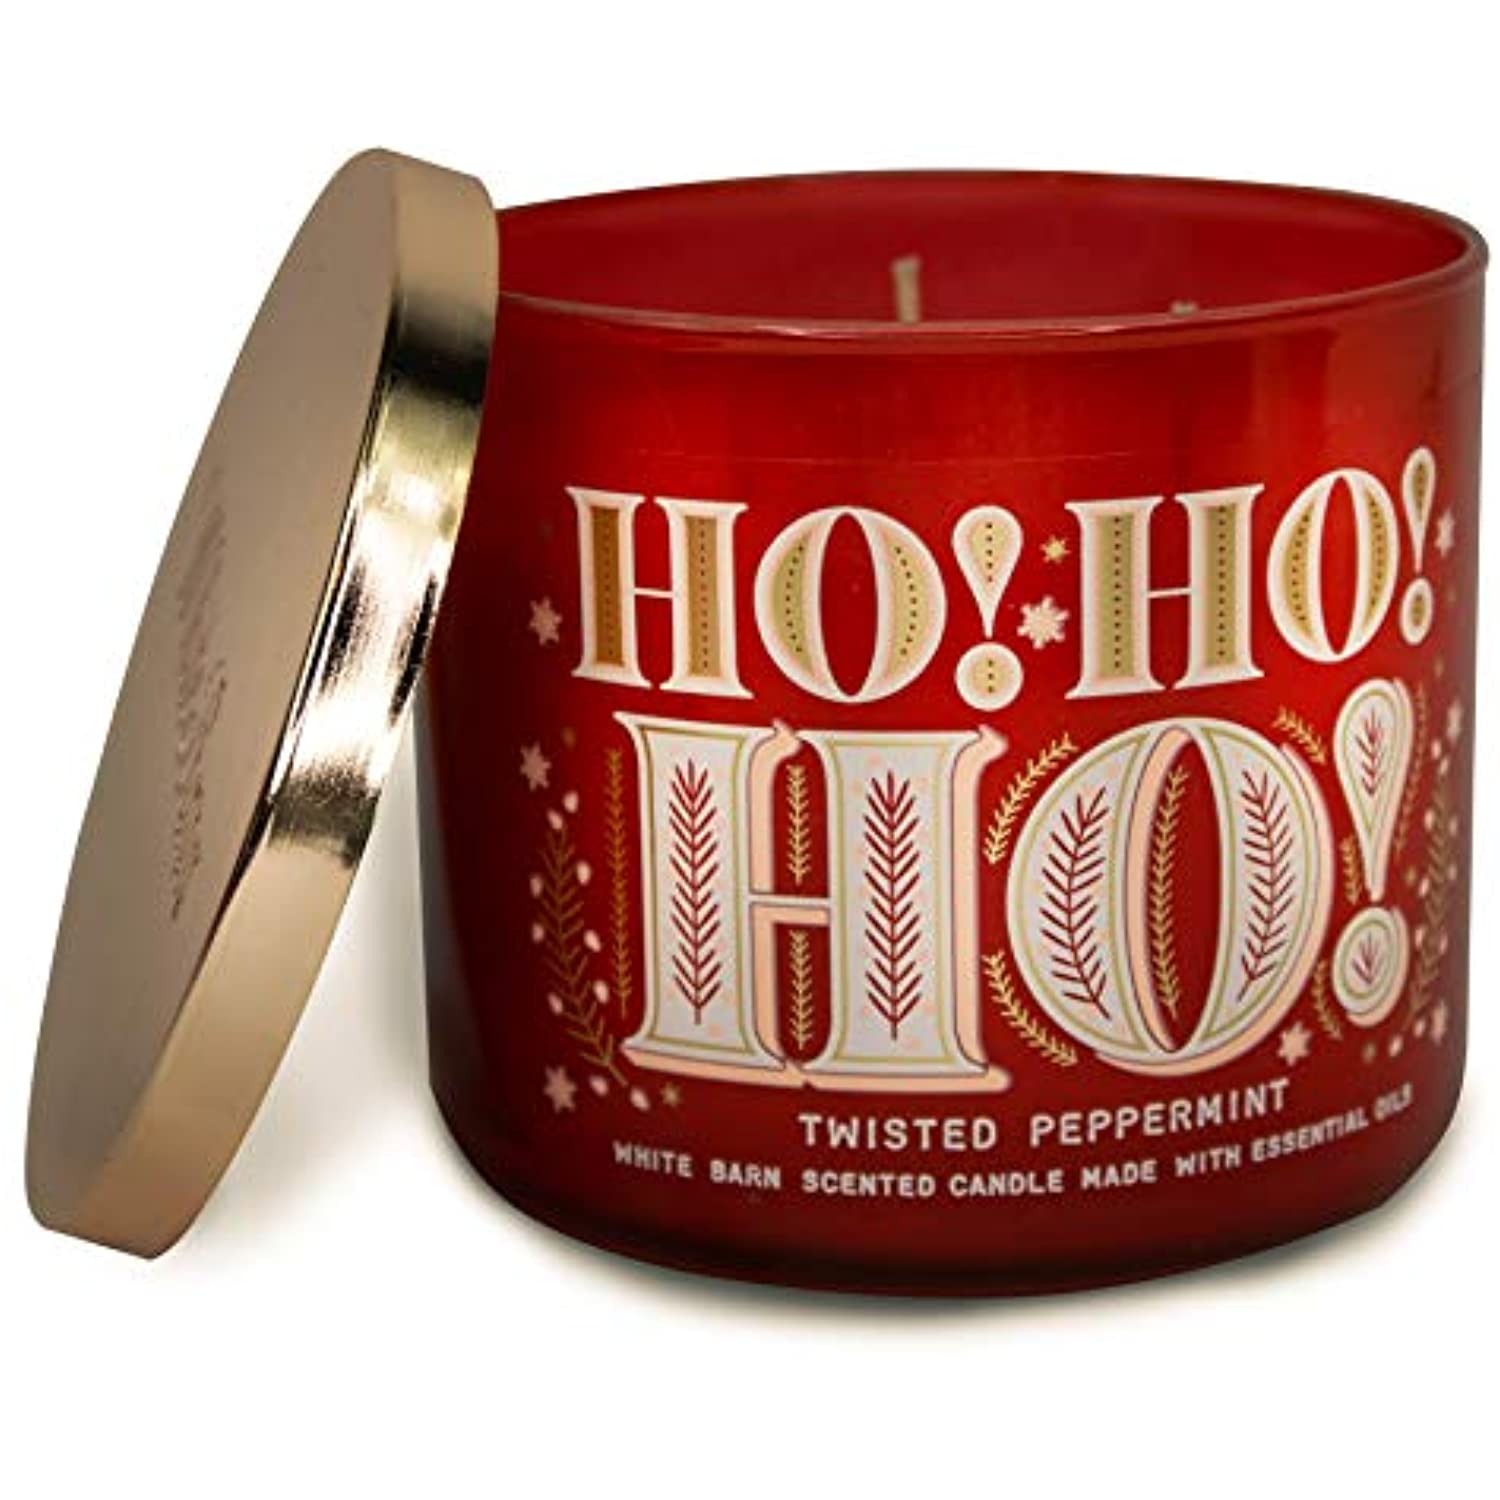 White Barn 3-Wick Candle w/Essential Oils - 14.5 oz - 2020 Holidays Scents! (Twisted Peppermint) - image 3 of 7